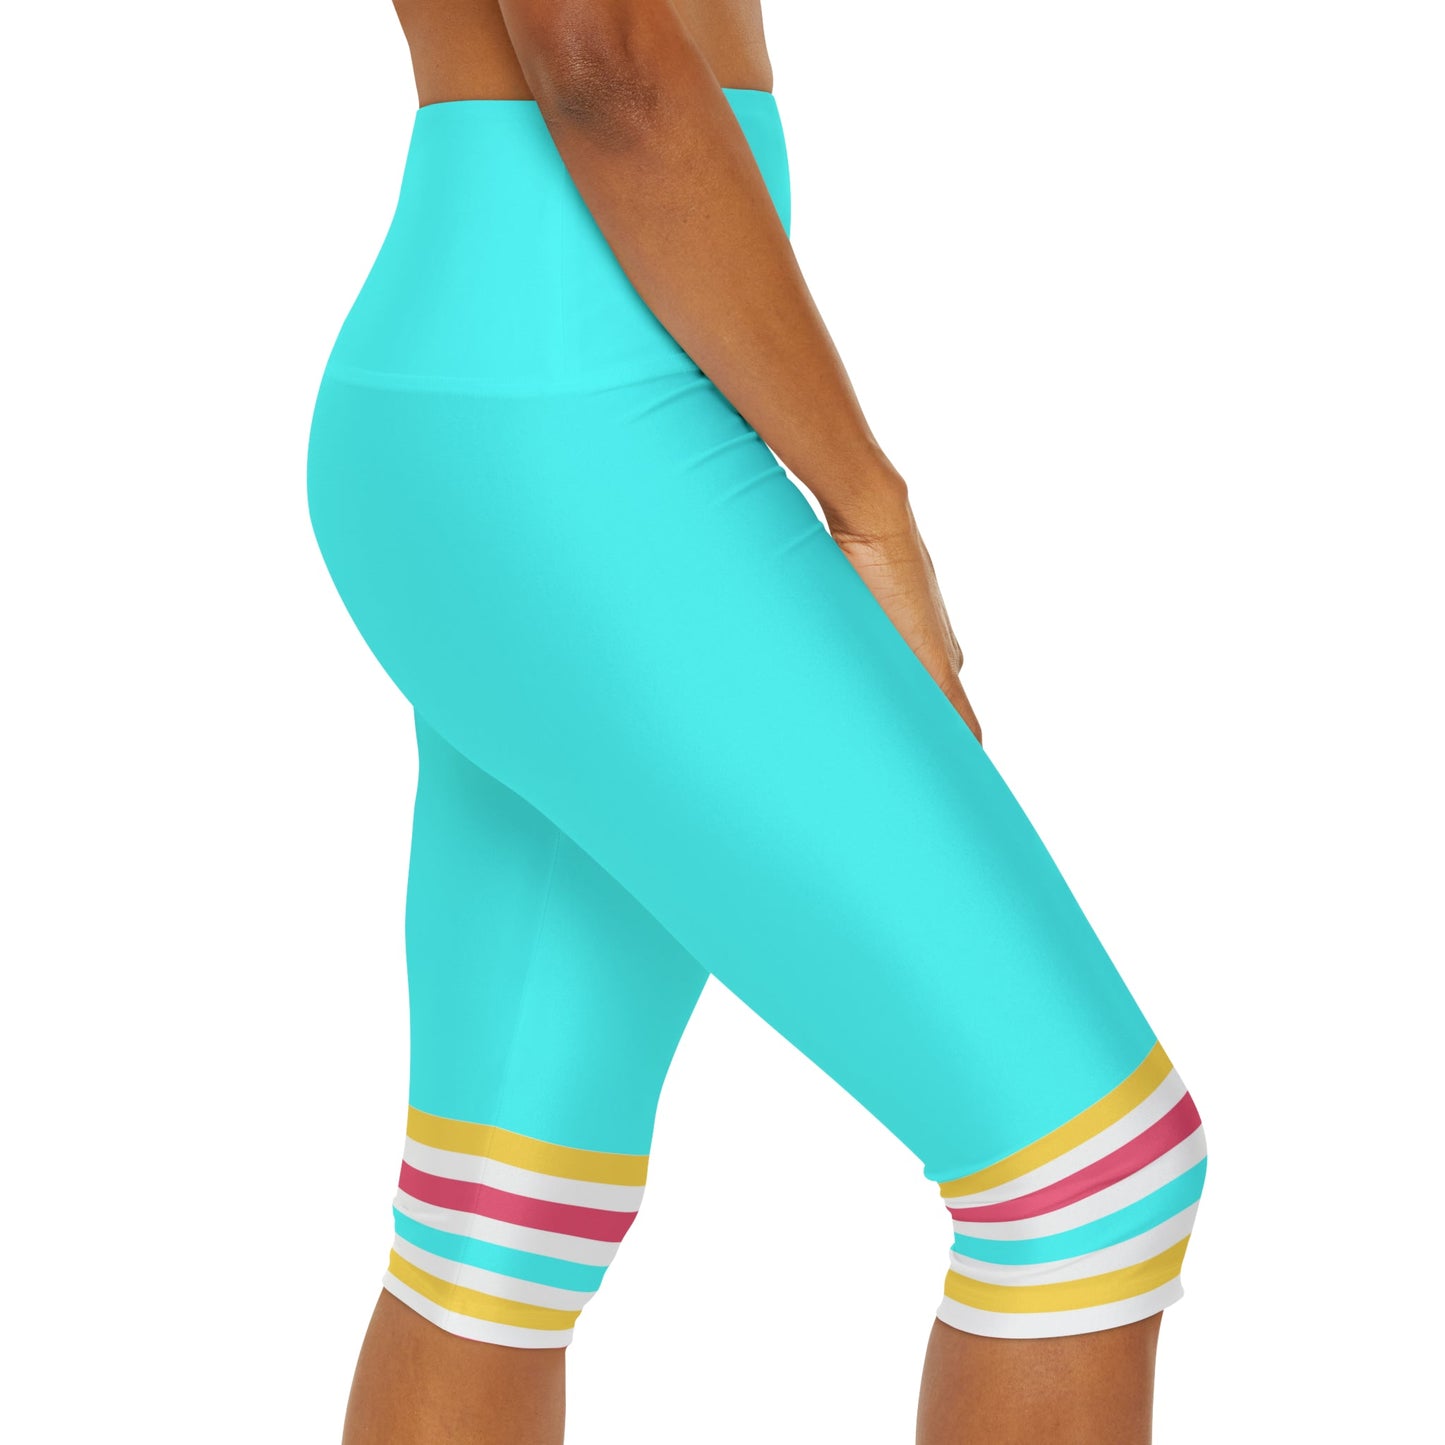 Toy Doll Story Yoga Capri Leggings - Running Costume, Cosplay, Bounding All Over PrintAOPAdult ShortsLittle Lady Shay Boutique